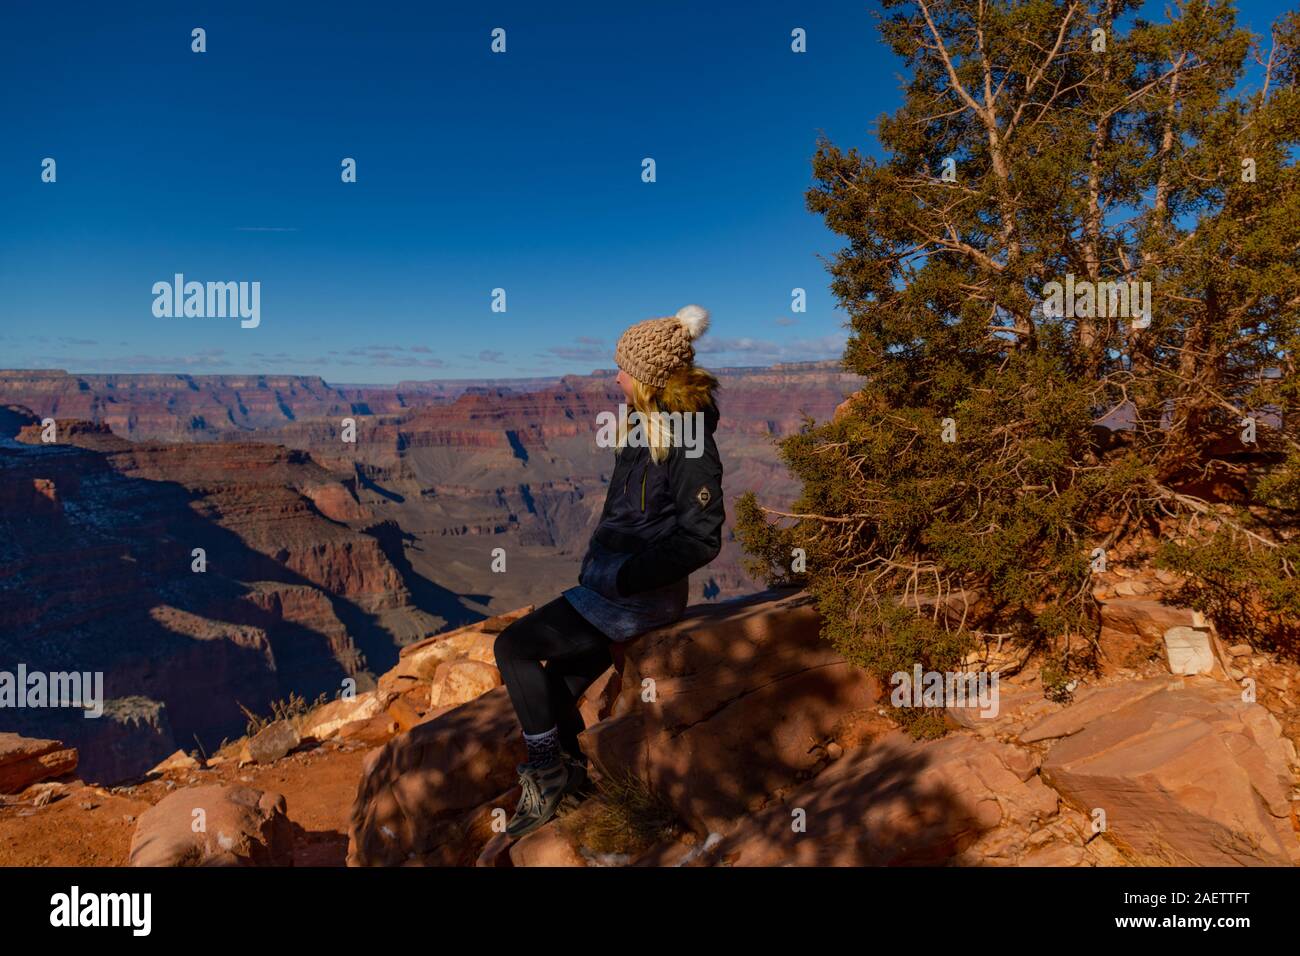 A girl sitting and looking out over the grand canyon Stock Photo